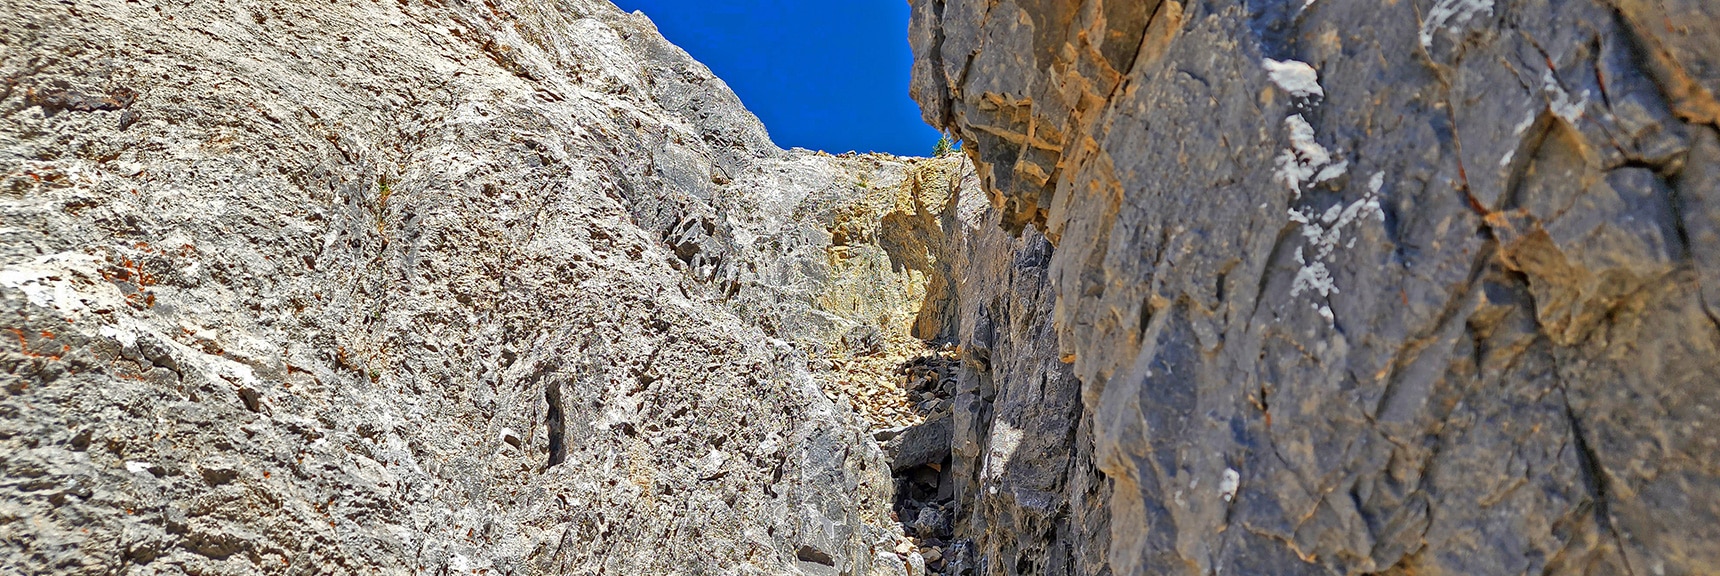 Arrival at the Final Approach Cliff Opening. Fairly Easy Class 3 Scramble. | Mummy Mountain Grand Crossing | Lee Canyon to Deer Creek Road | Mt Charleston Wilderness | Spring Mountains, Nevada |